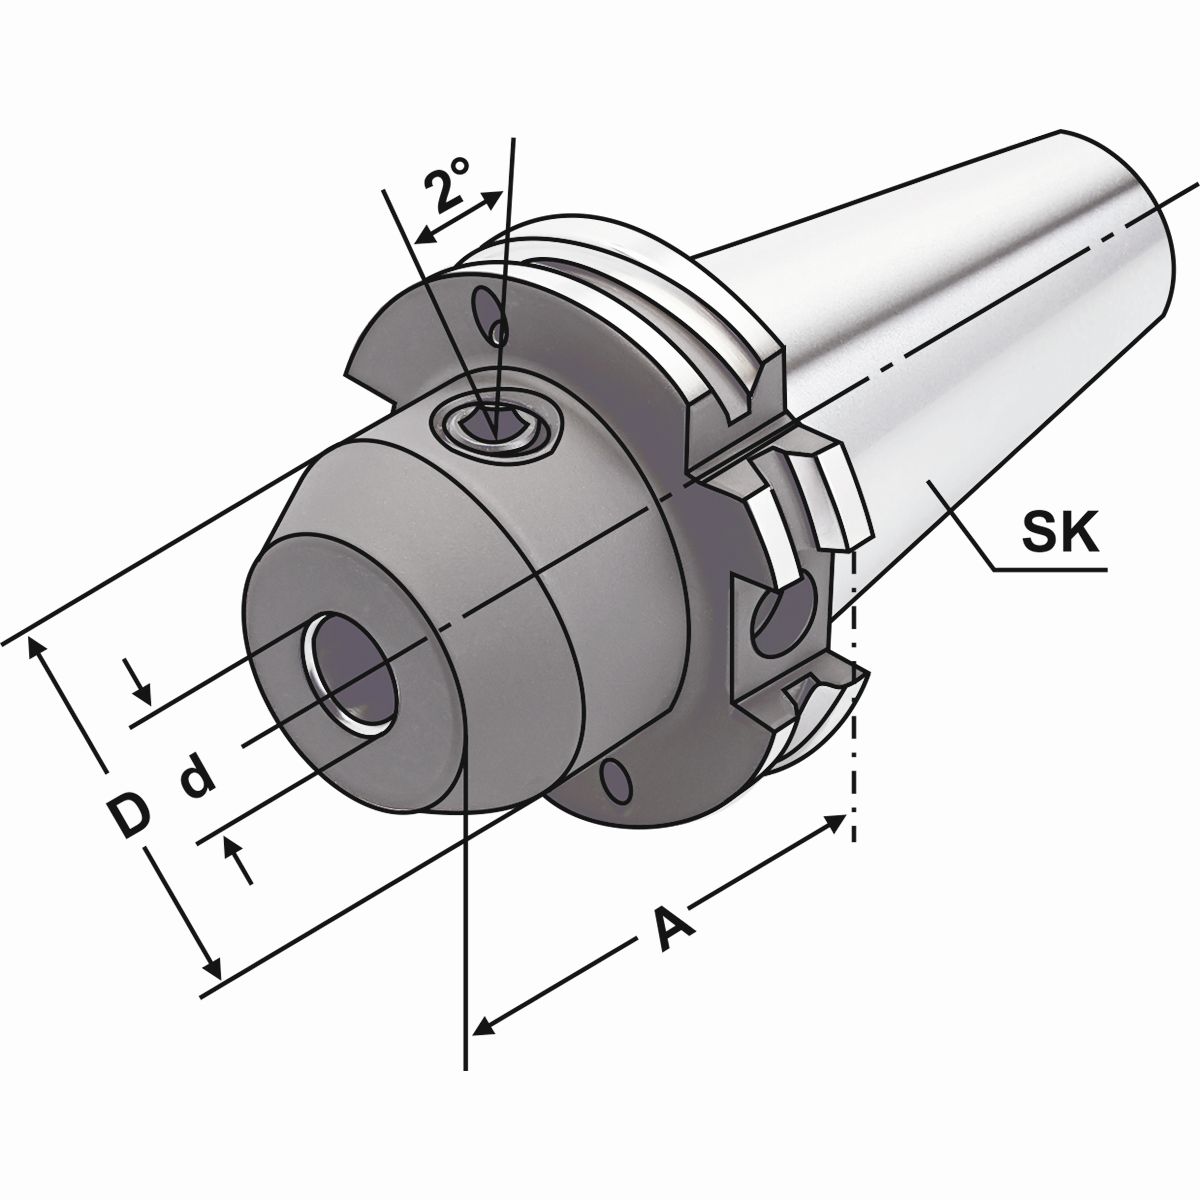 Whistle Notch SK 40-10-50 DIN 69871 AD/B